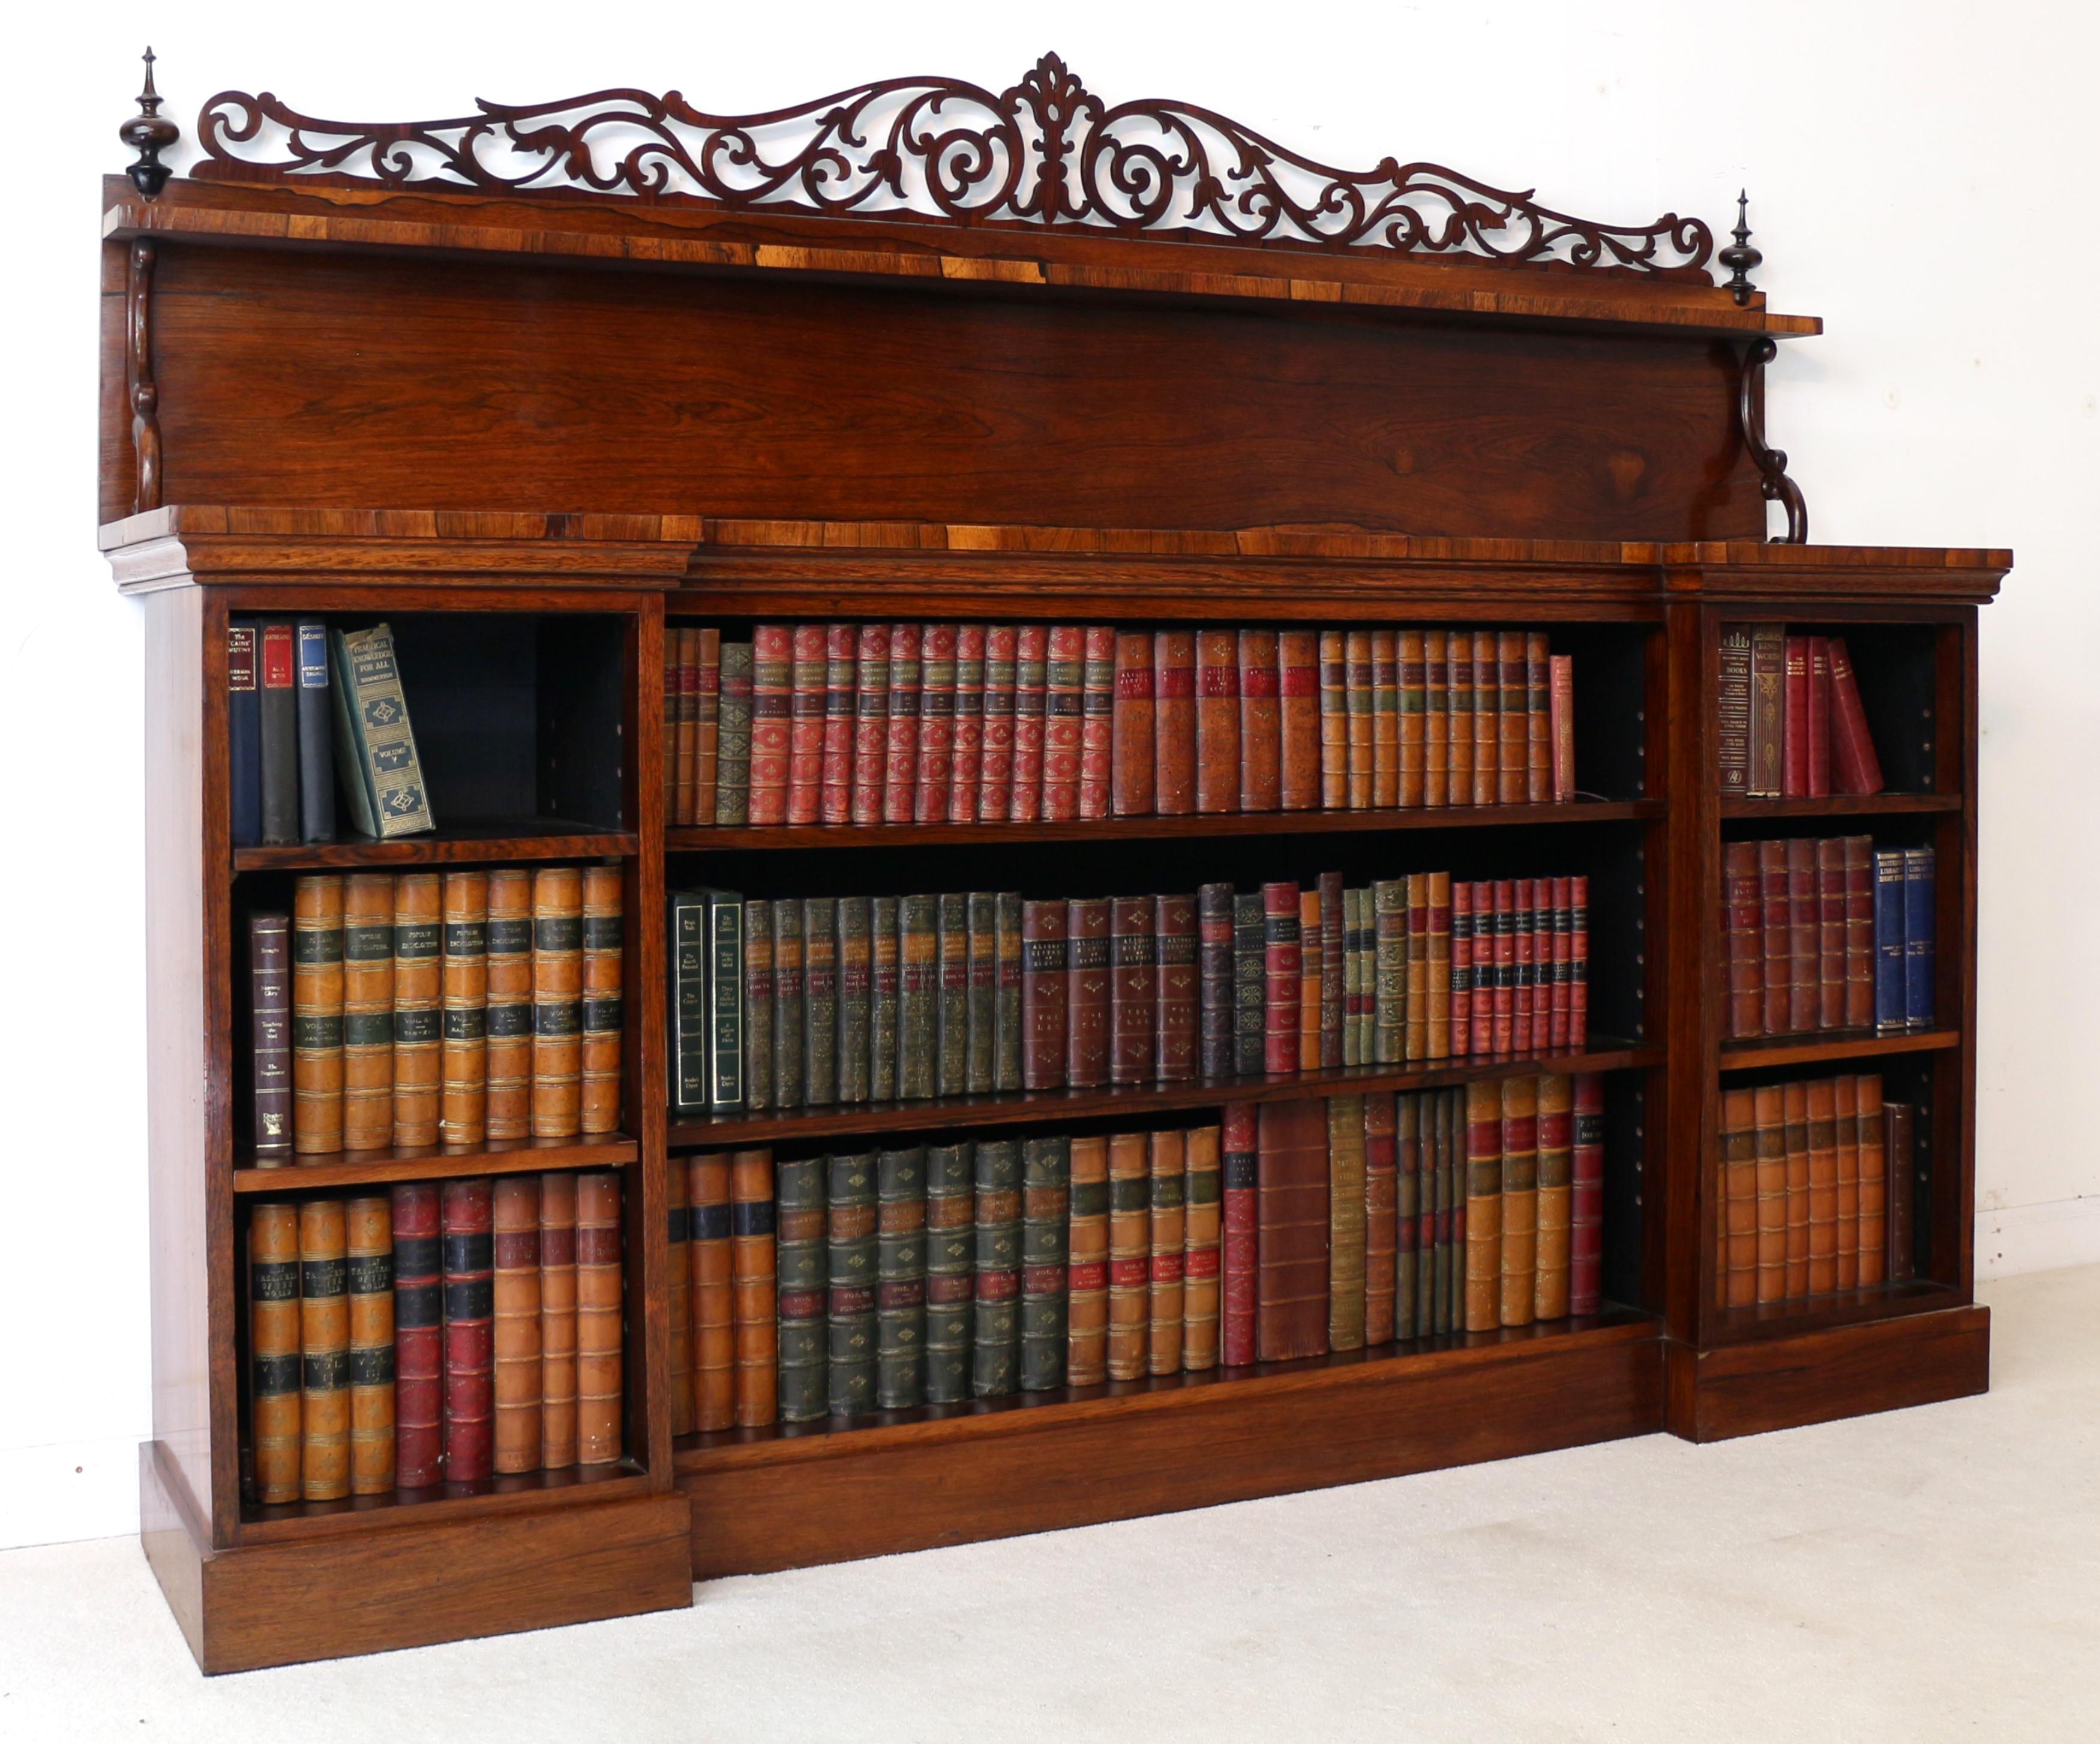 A superb quality Indian Regency rosewood inverted breakfront bookcase dating to circa 1820. With a stunning pierced scrolling fretwork back with turned finials above a shelf supported by C-scroll supports, the inverted breakfront top above an open